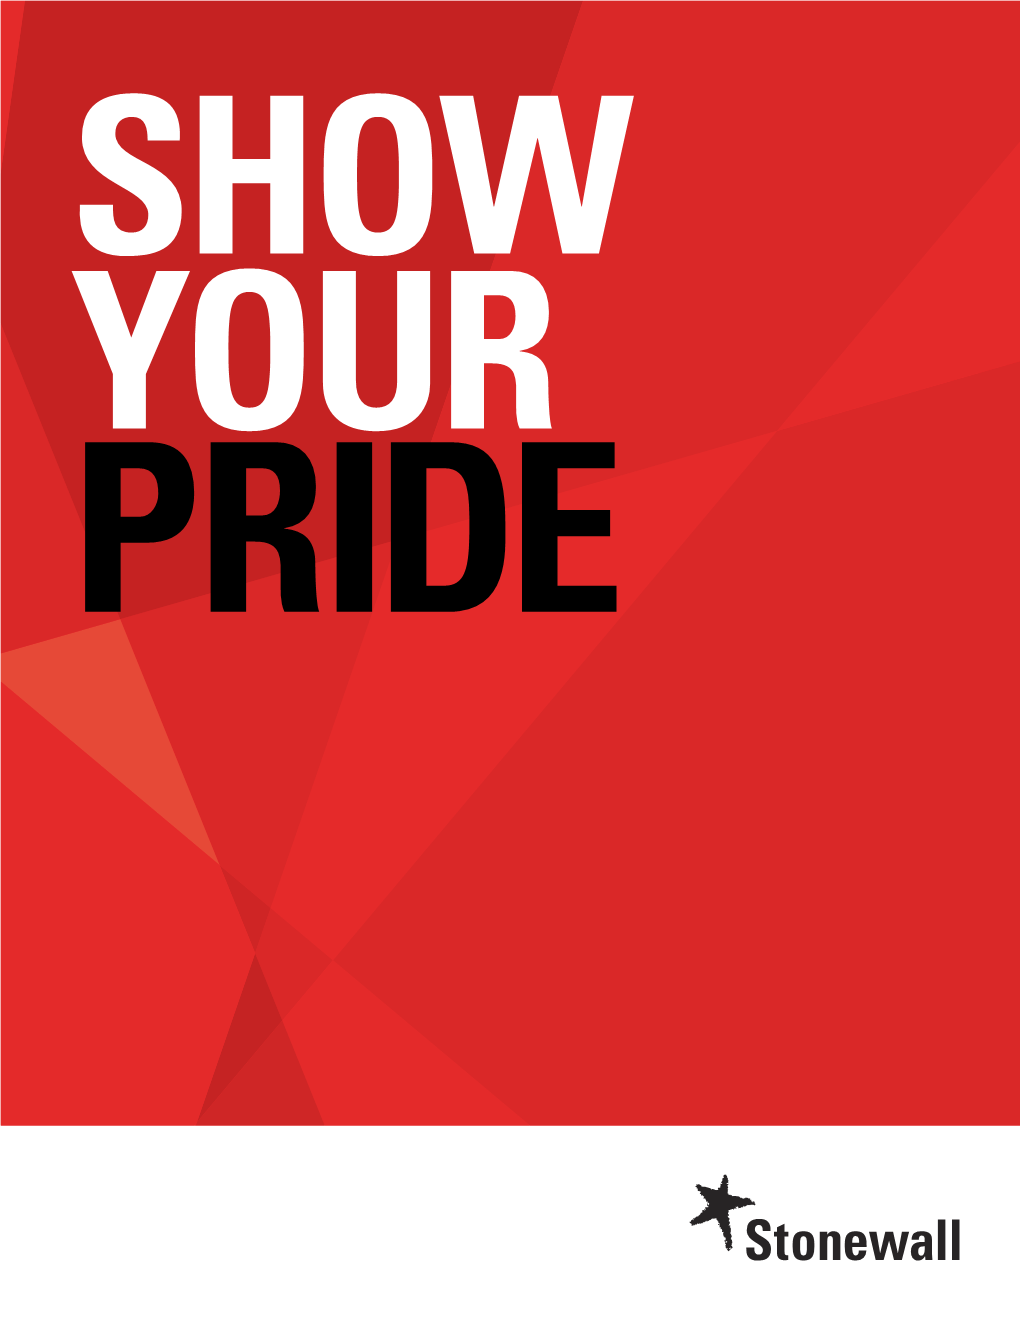 PRIDE SHOW YOUR PRIDE Thank You for Showing Your Pride with Stonewall This Summer